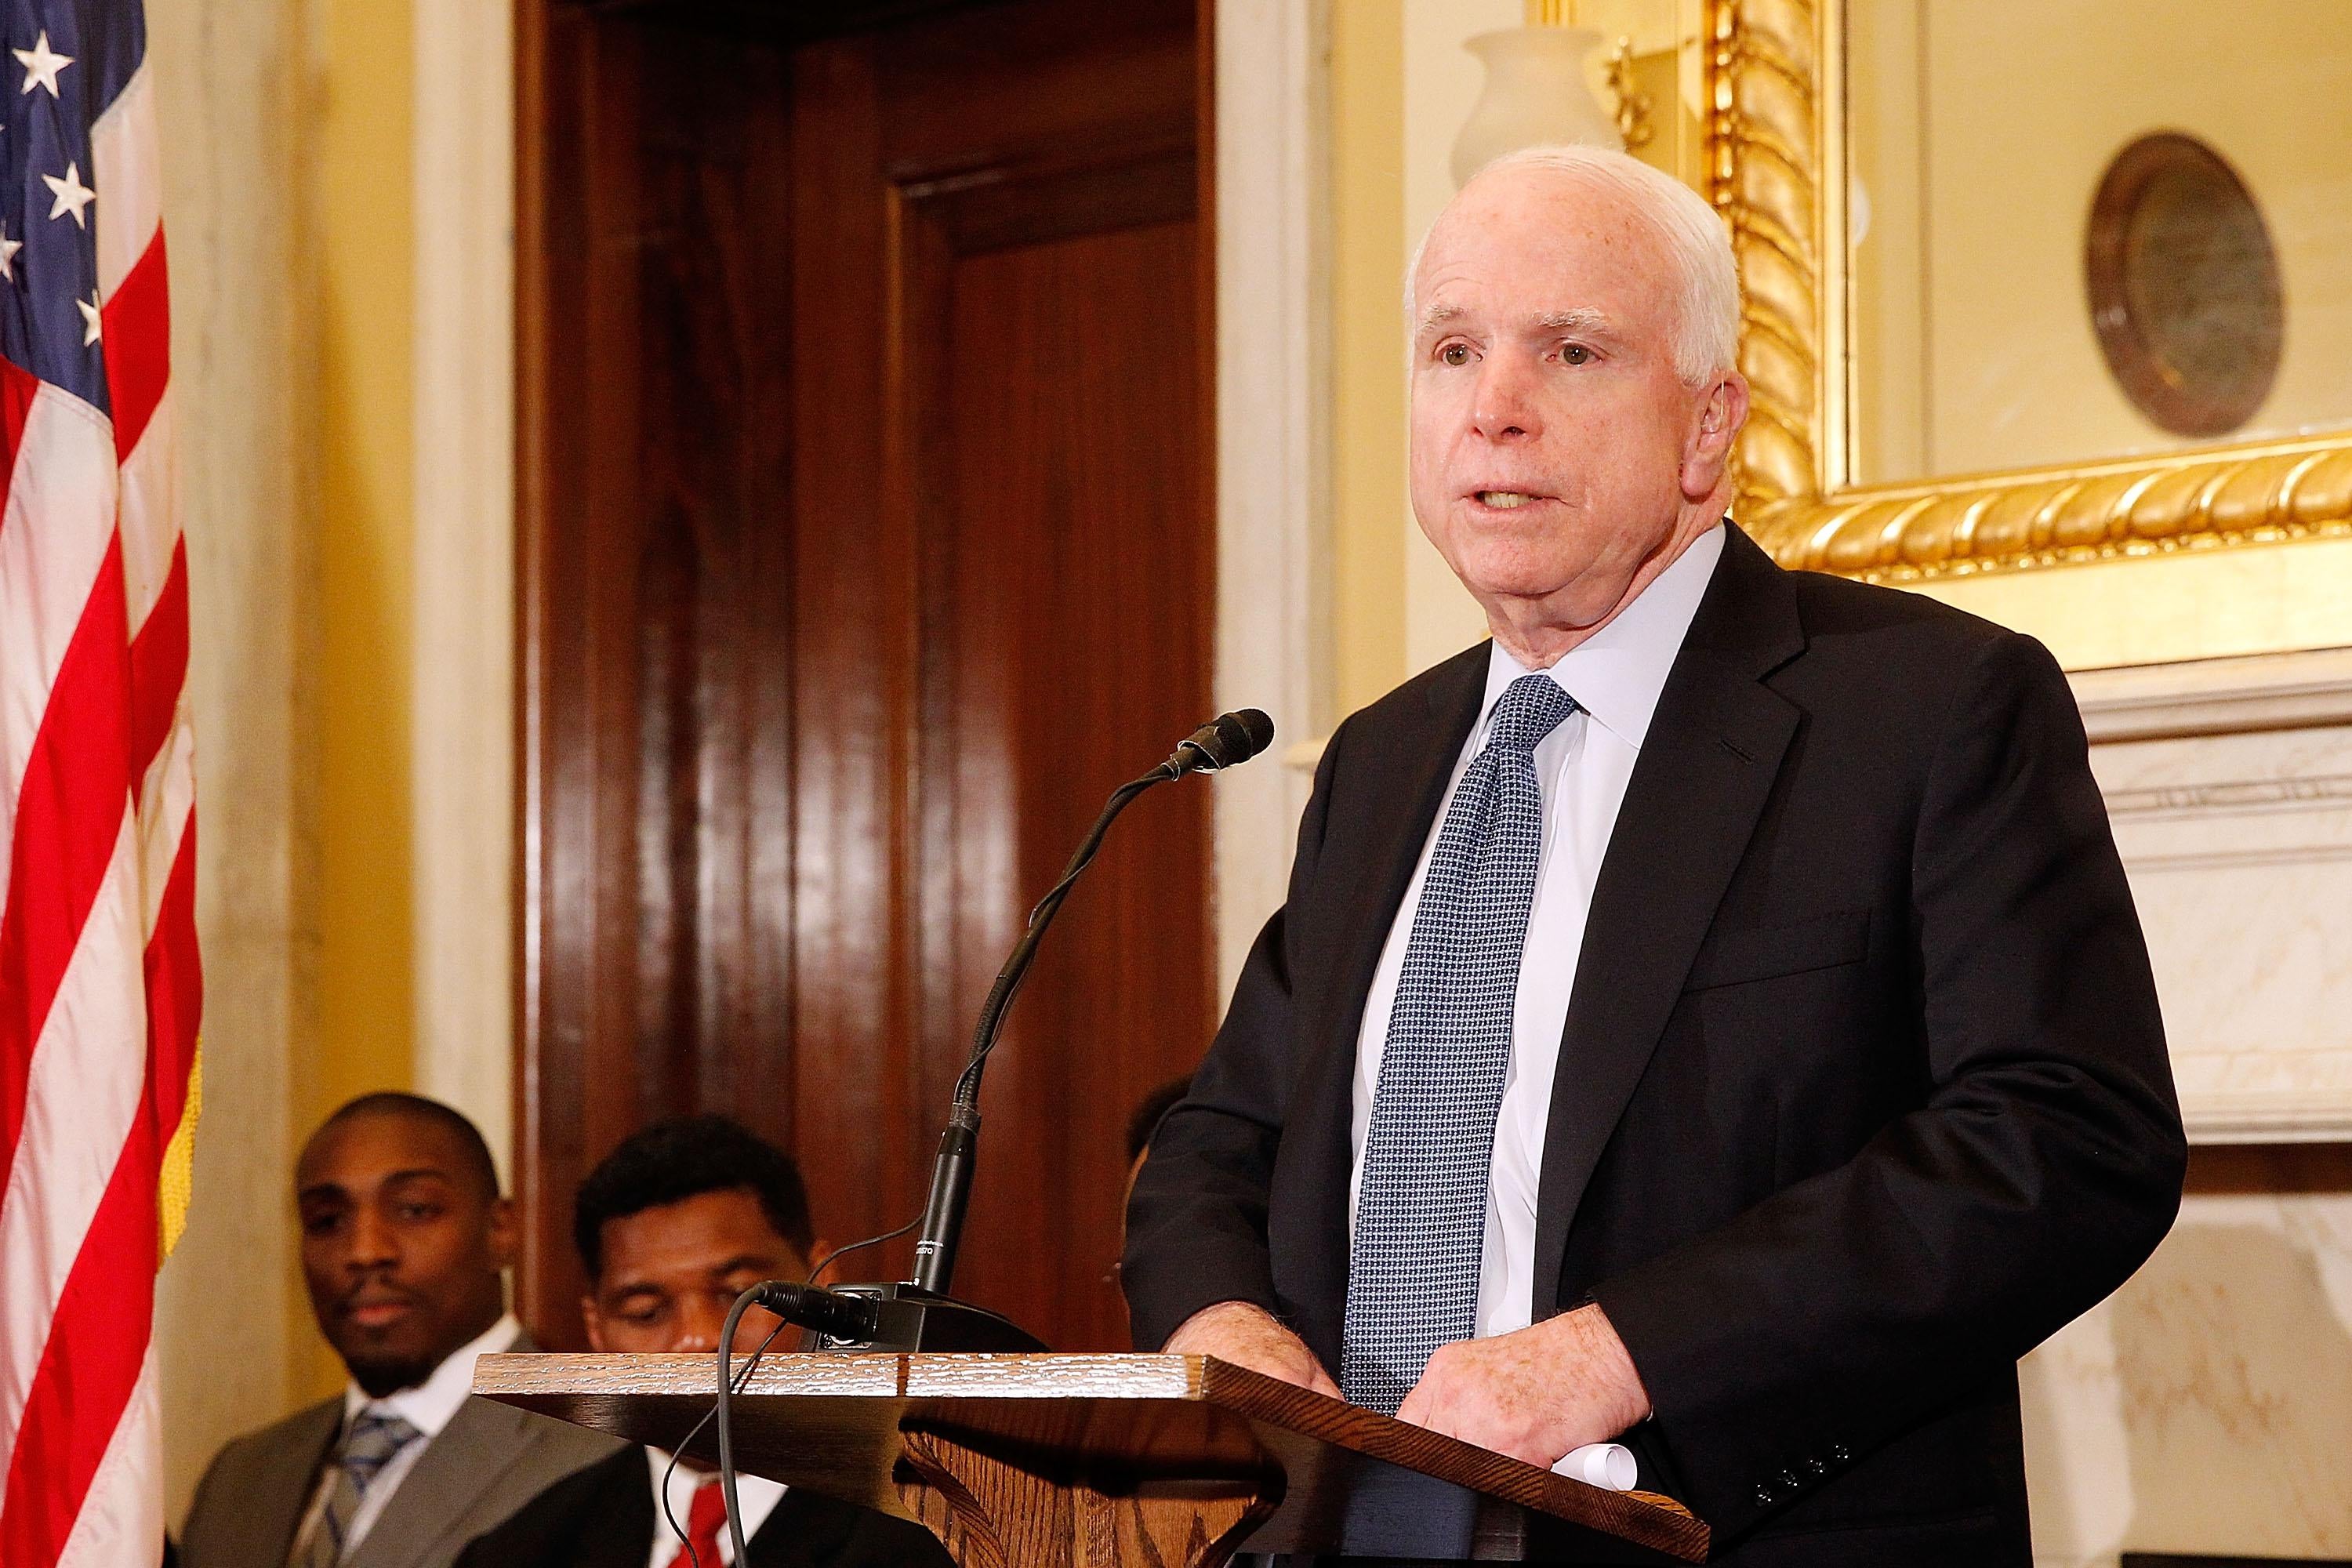 WASHINGTON, DC - APRIL 26:  Sen. John McCain (R-AZ) speaks at a press conference to show support of  professional fighters study at Cleveland Clinic Lou Ruvo Center for Brain Health on April 26, 2016 in the Russell Senate Building in Washington, DC.  (Photo by Paul Morigi/Getty Images for Spike TV)